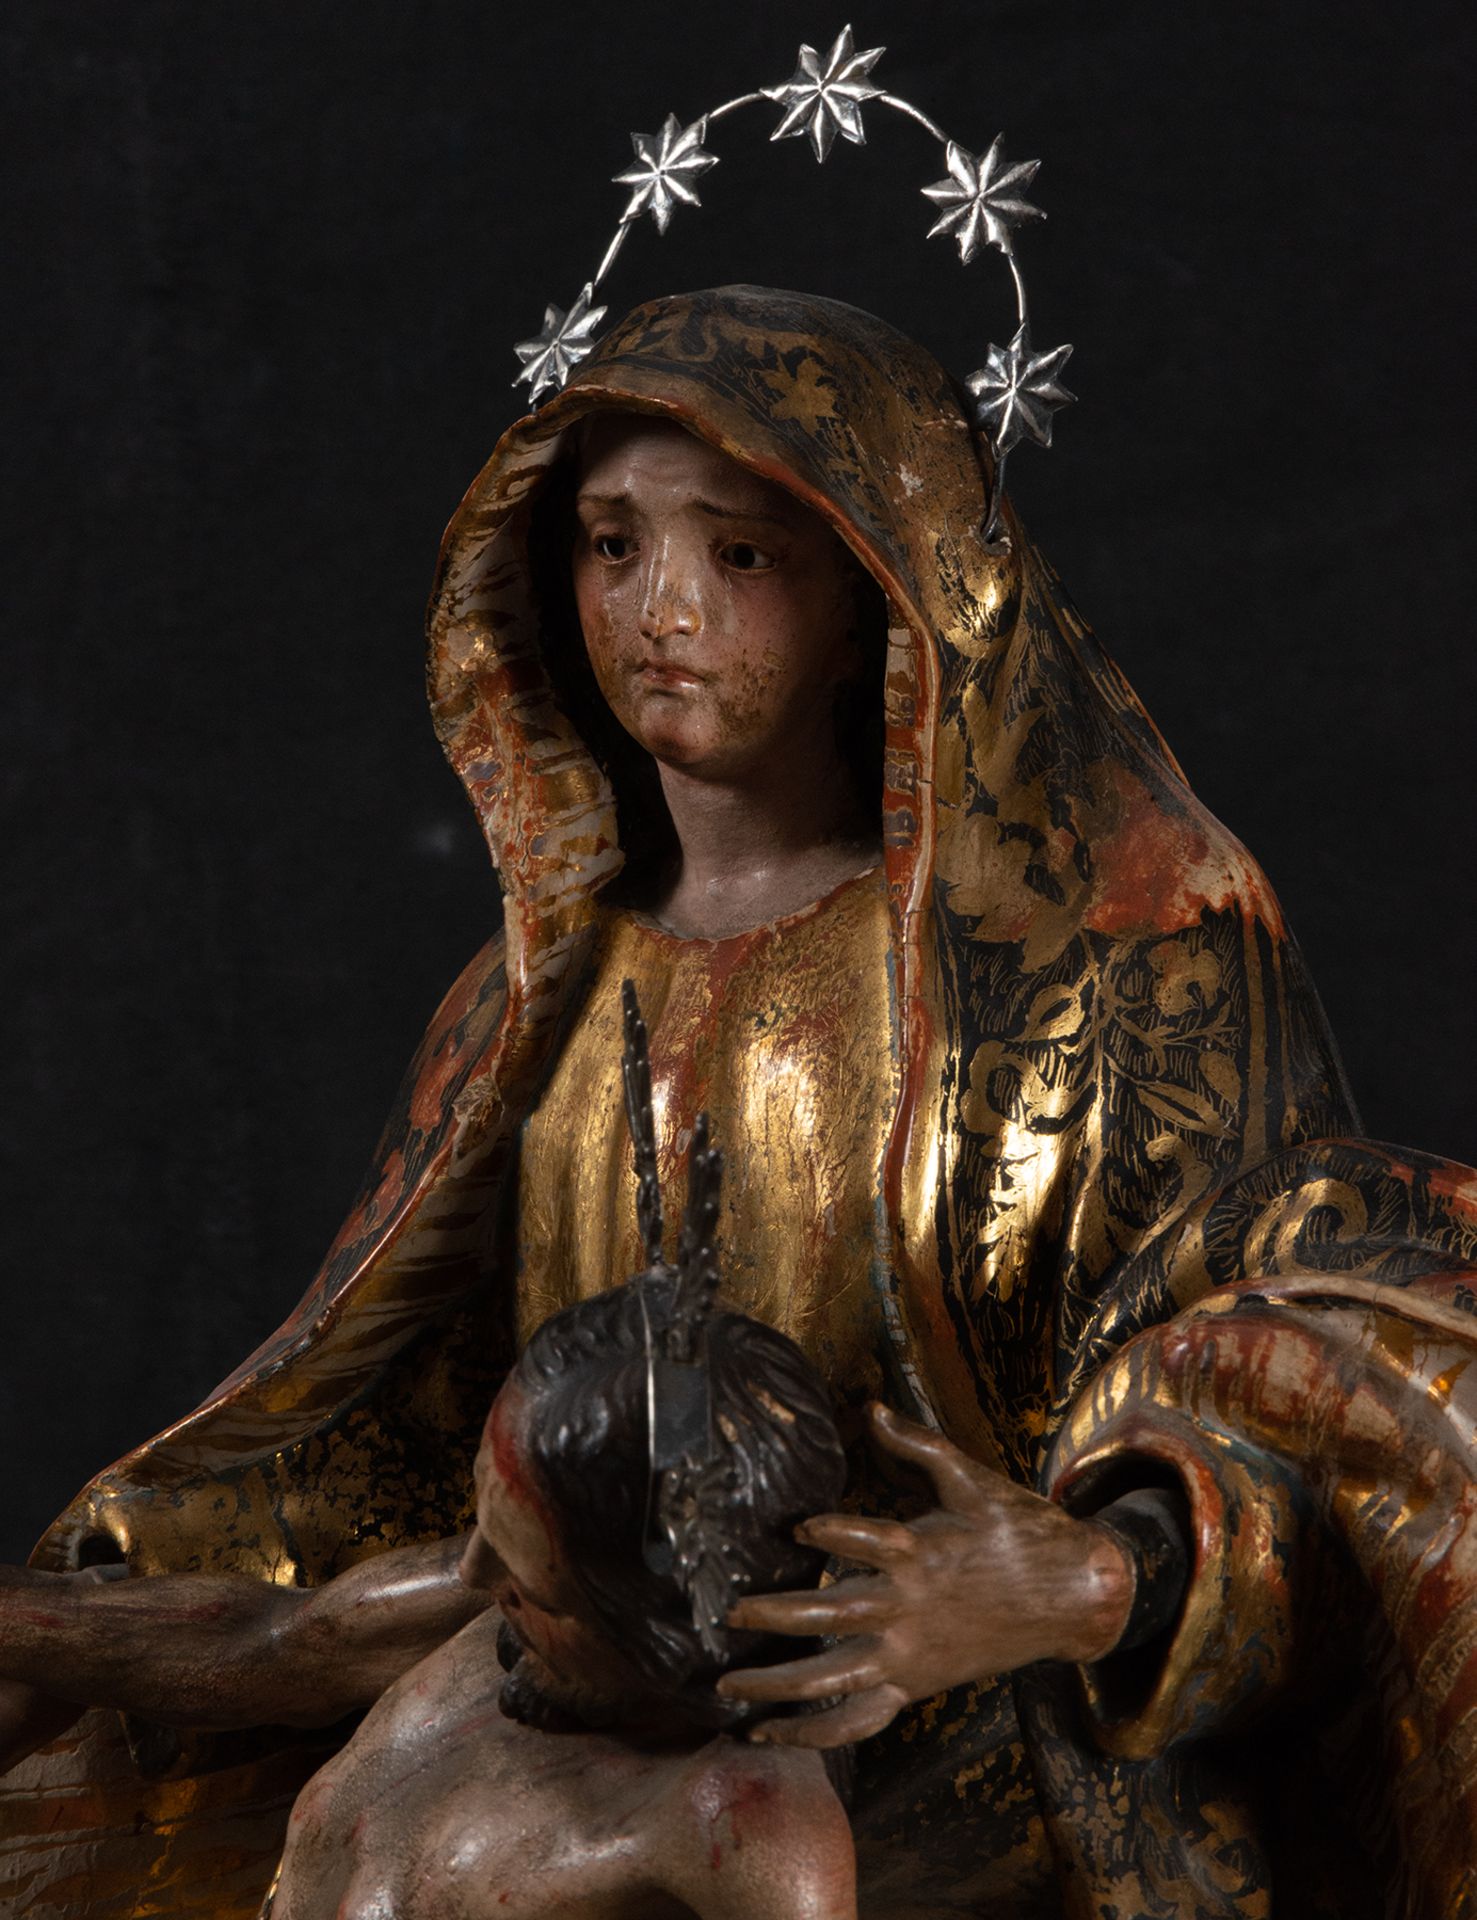 Exceptional Pieta depicting Mary with Christ in her arms, Guatemala, early 18th century Novohisopano - Image 4 of 8